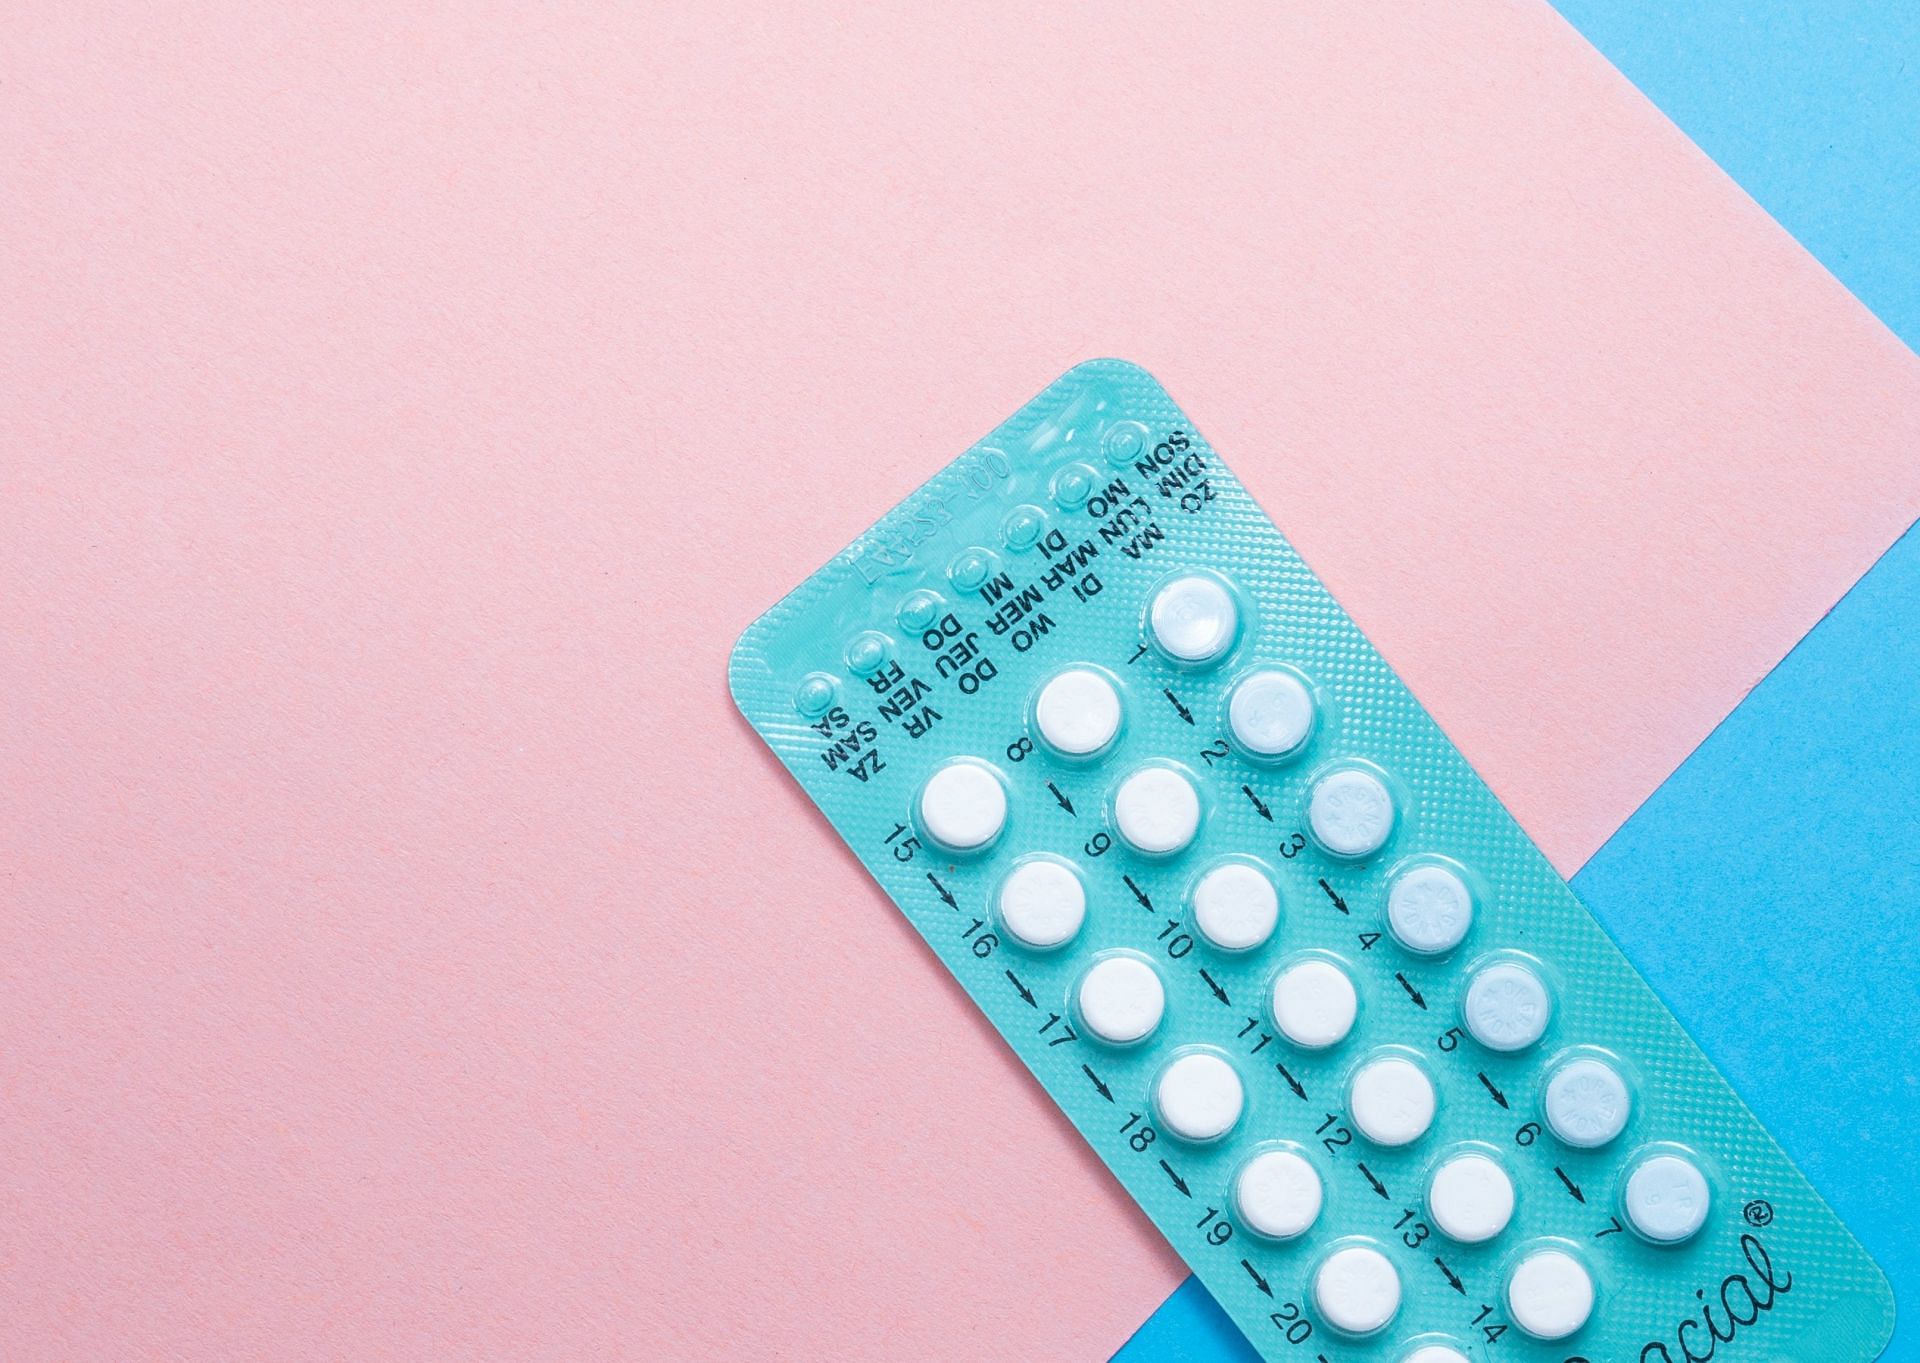 Progesterone hormone is produced in both males and females. (Image via Unsplash/ Reproductive Health Supplies Coalition)